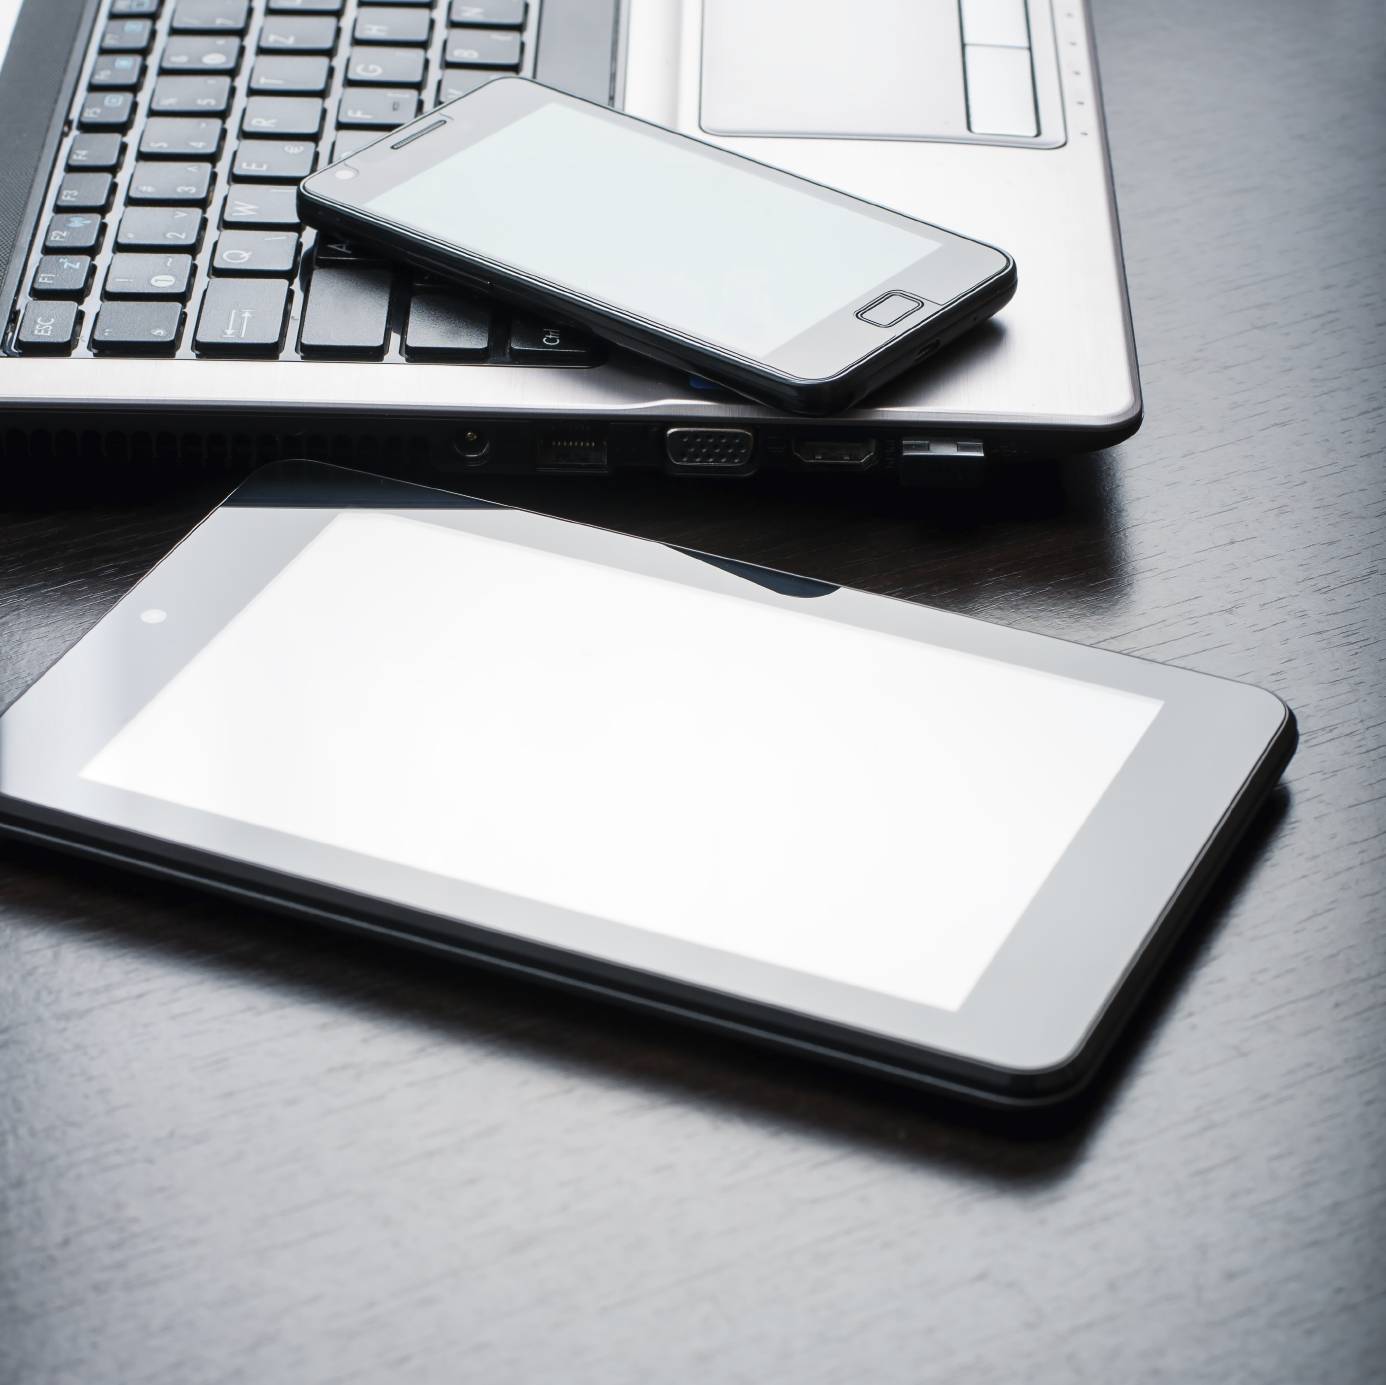 stock photo - tablet, smartphone and laptop